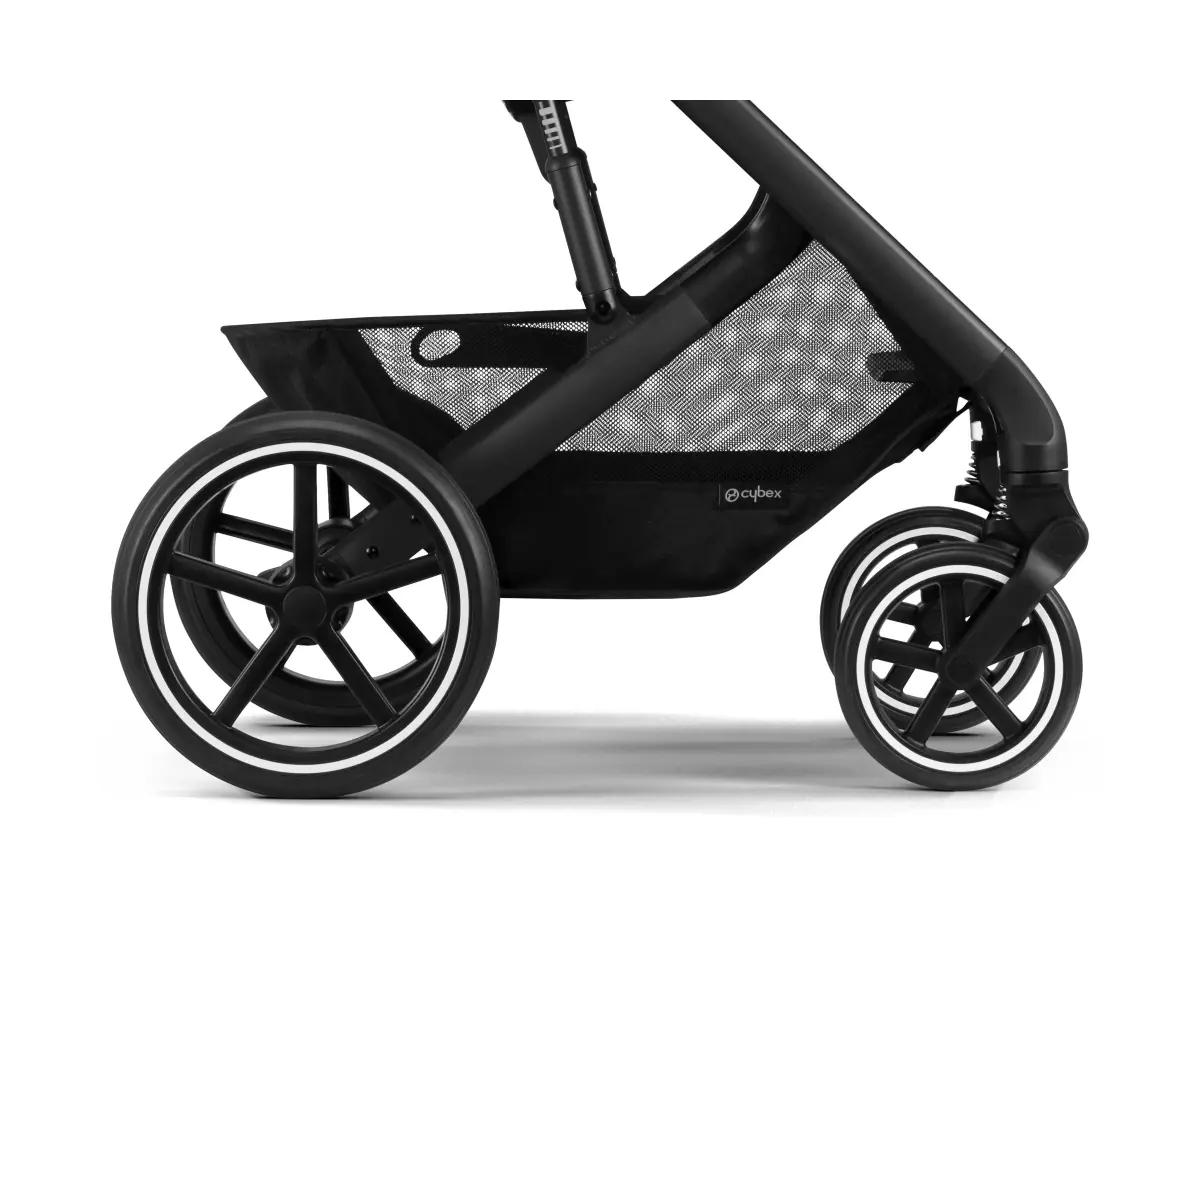 Cybex Balios S Lux Travelsystem Lava Grey - Silver Frame with Aton S2